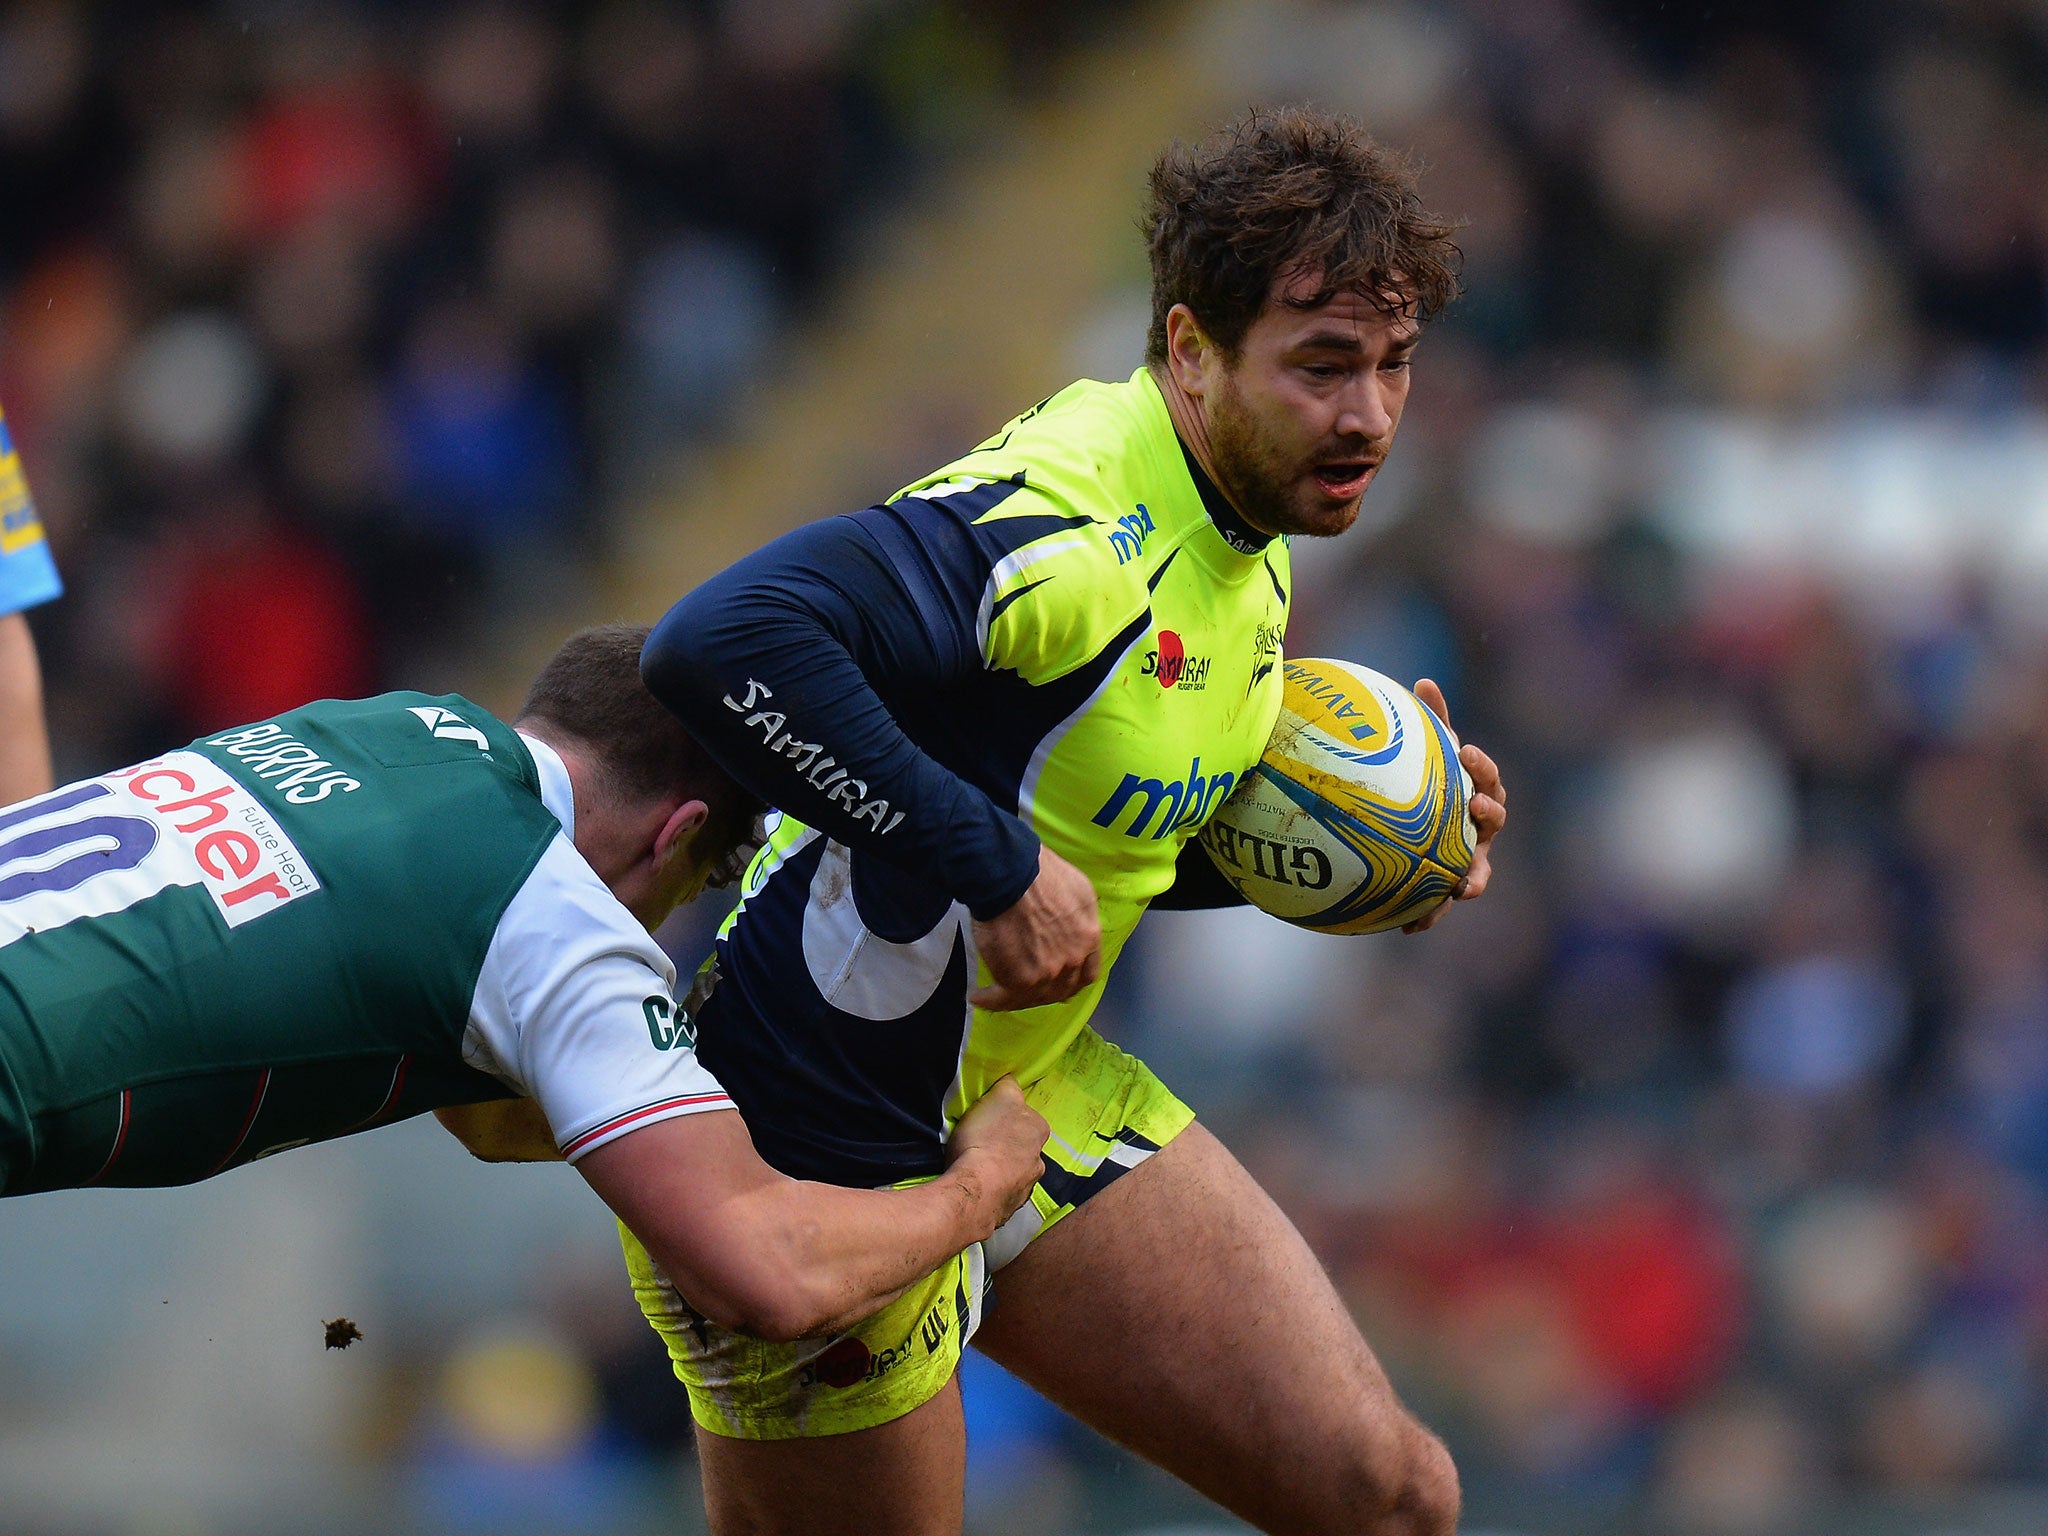 Danny Cipriani will leave Sale Sharks and rejoin Wasps at the end of the season